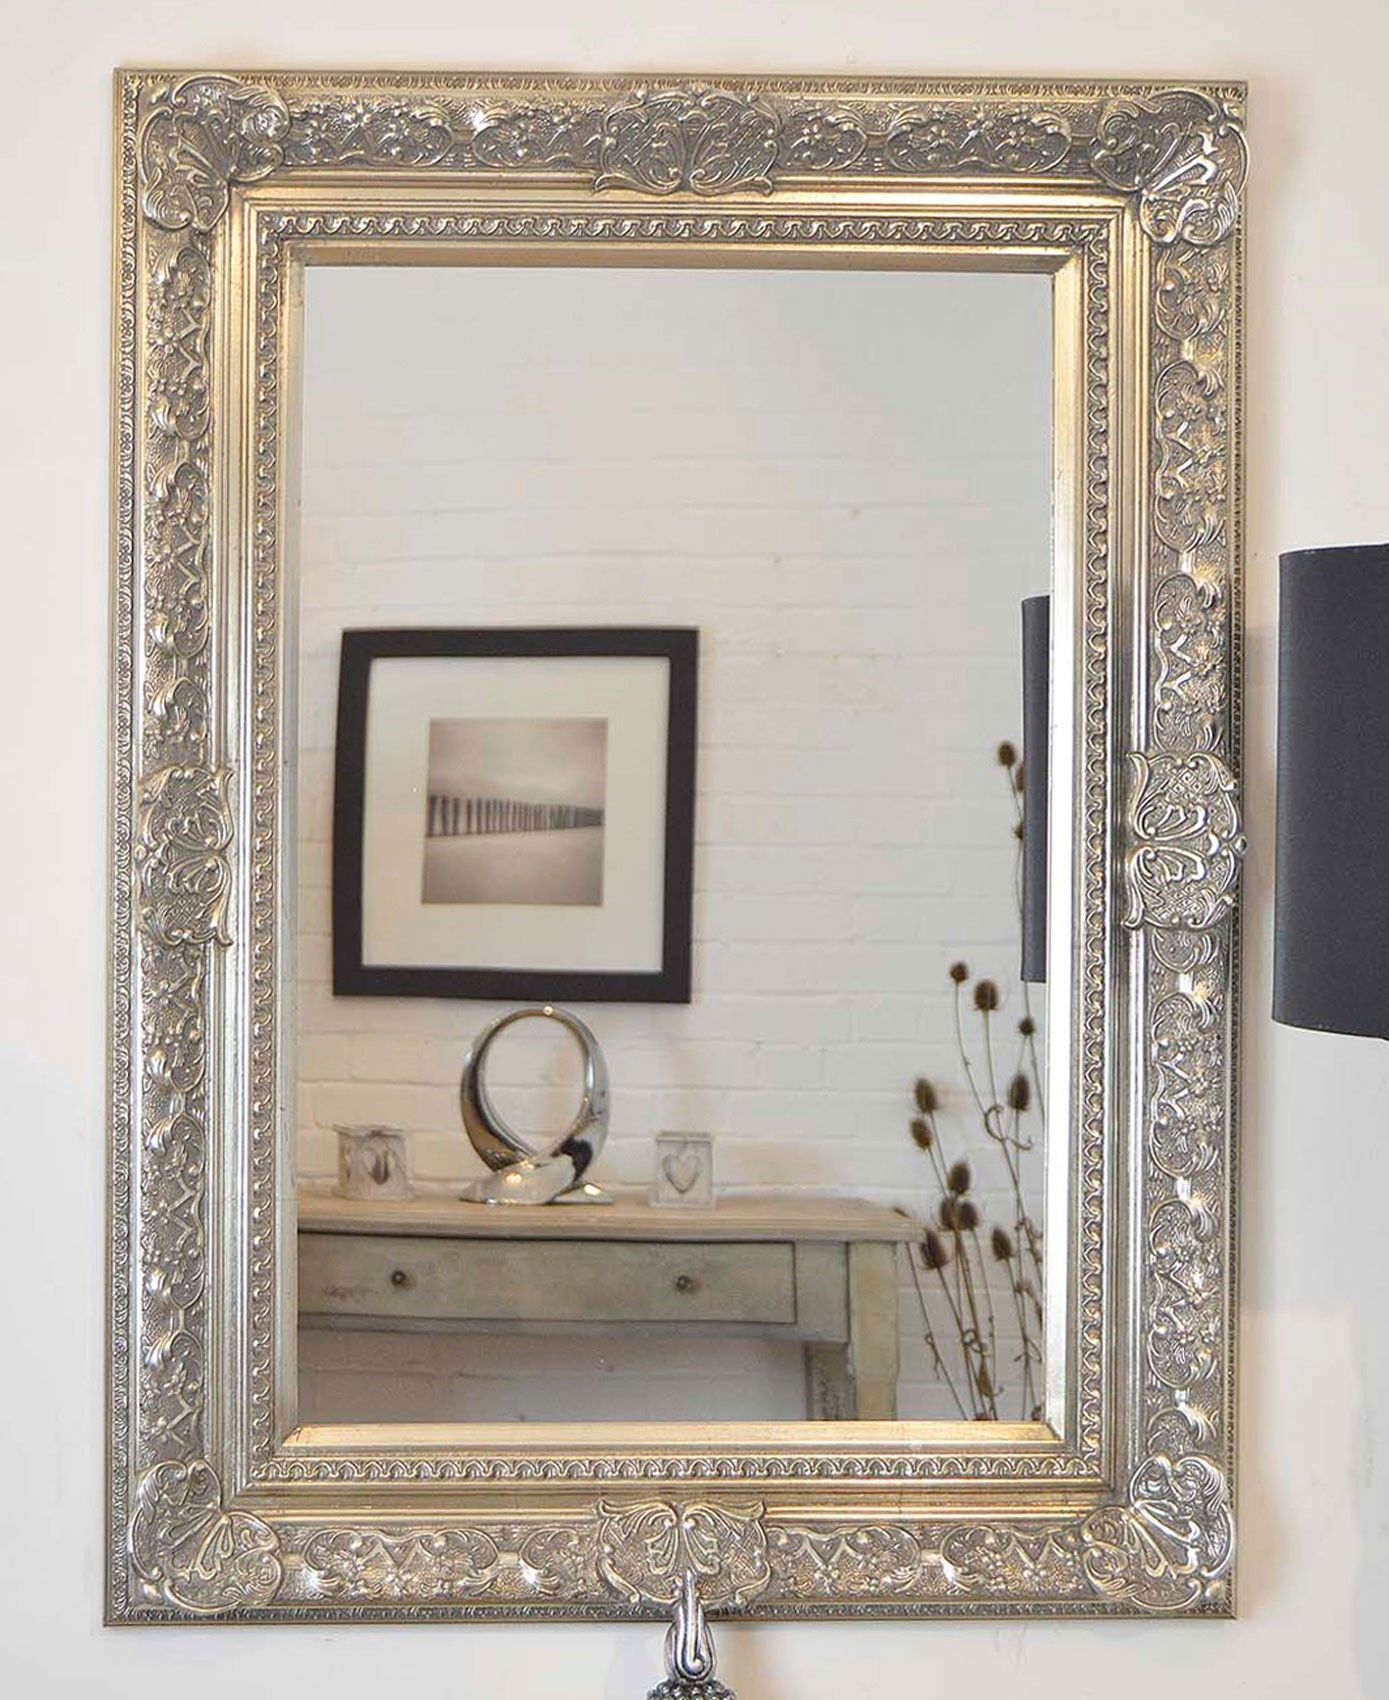 Stunning Decoration Large Silver Wall Mirror Vibrant Creative Wall Inside Antique Wall Mirrors Large (View 12 of 15)